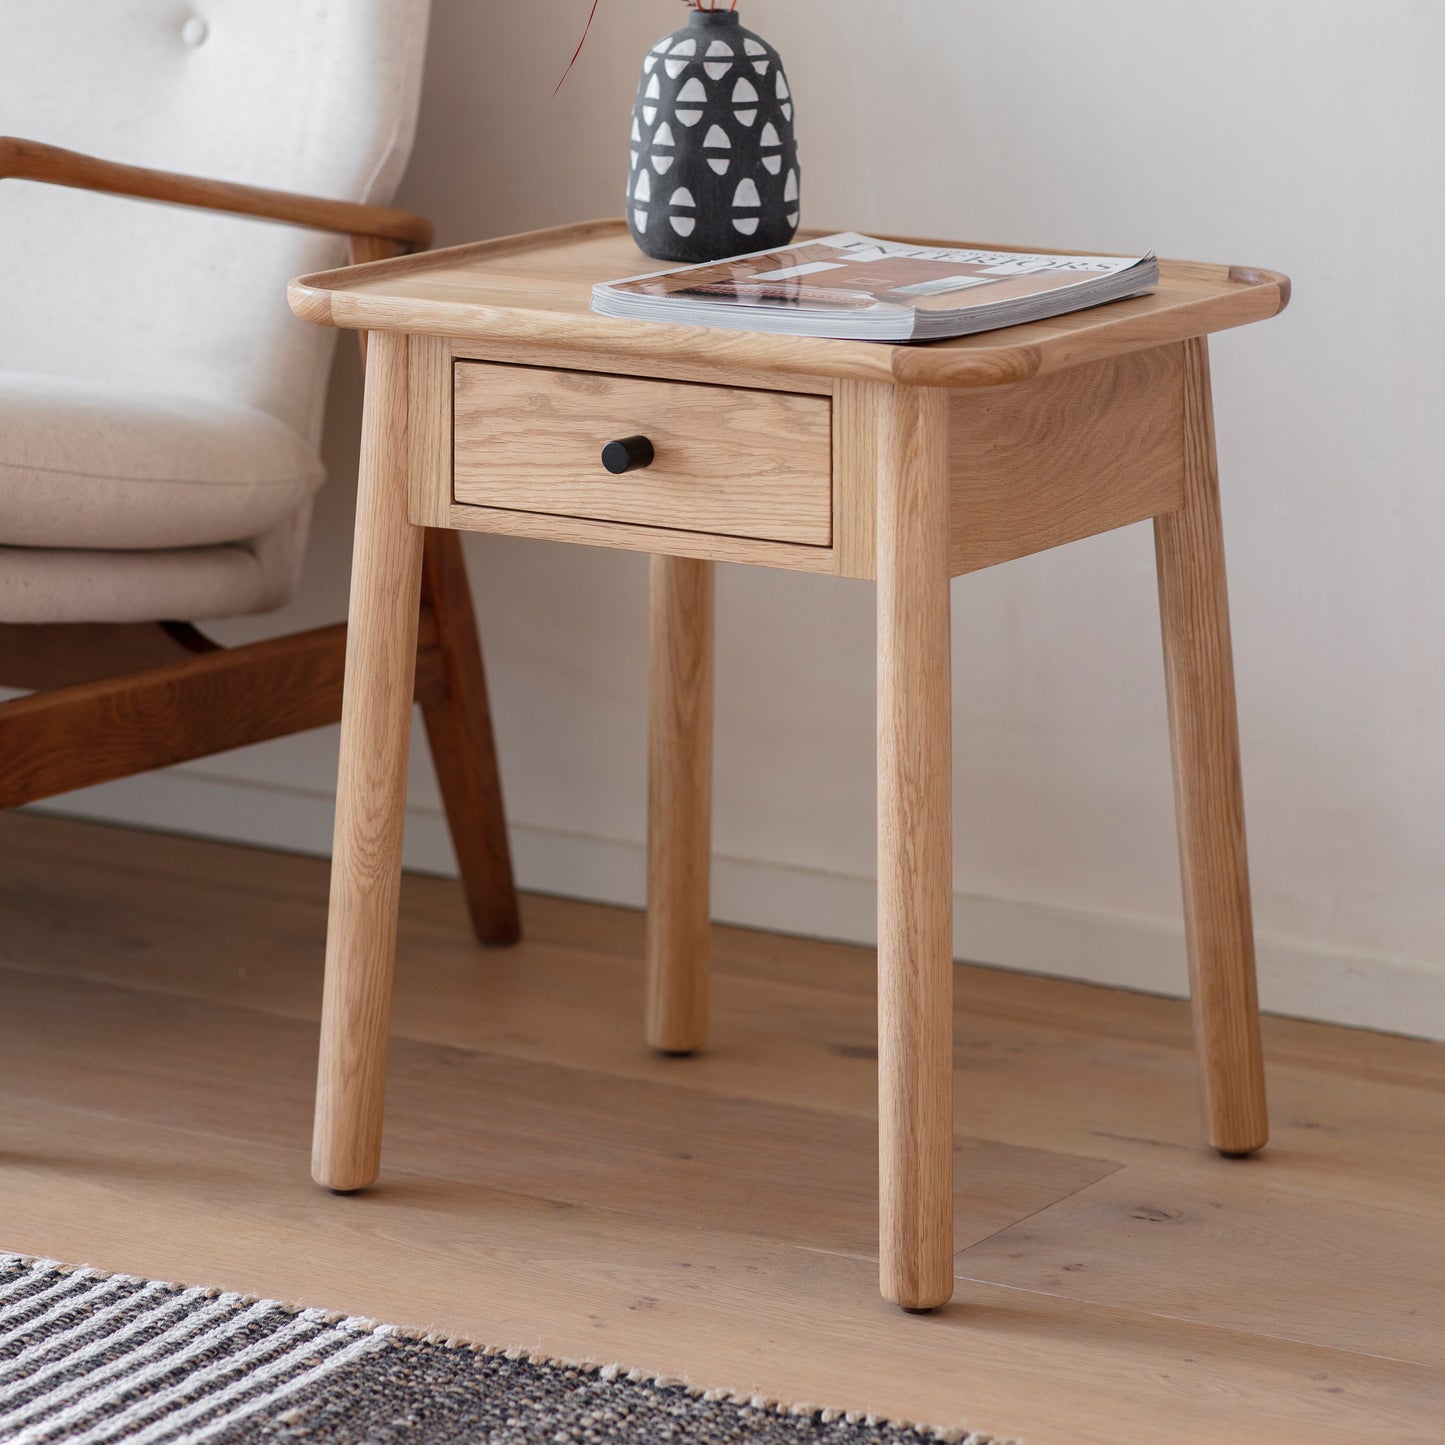 A small Wembury 1 Drawer Side Table 500x400x550mm from Kikiathome.co.uk with a book on it, perfect for home furniture and interior decor.